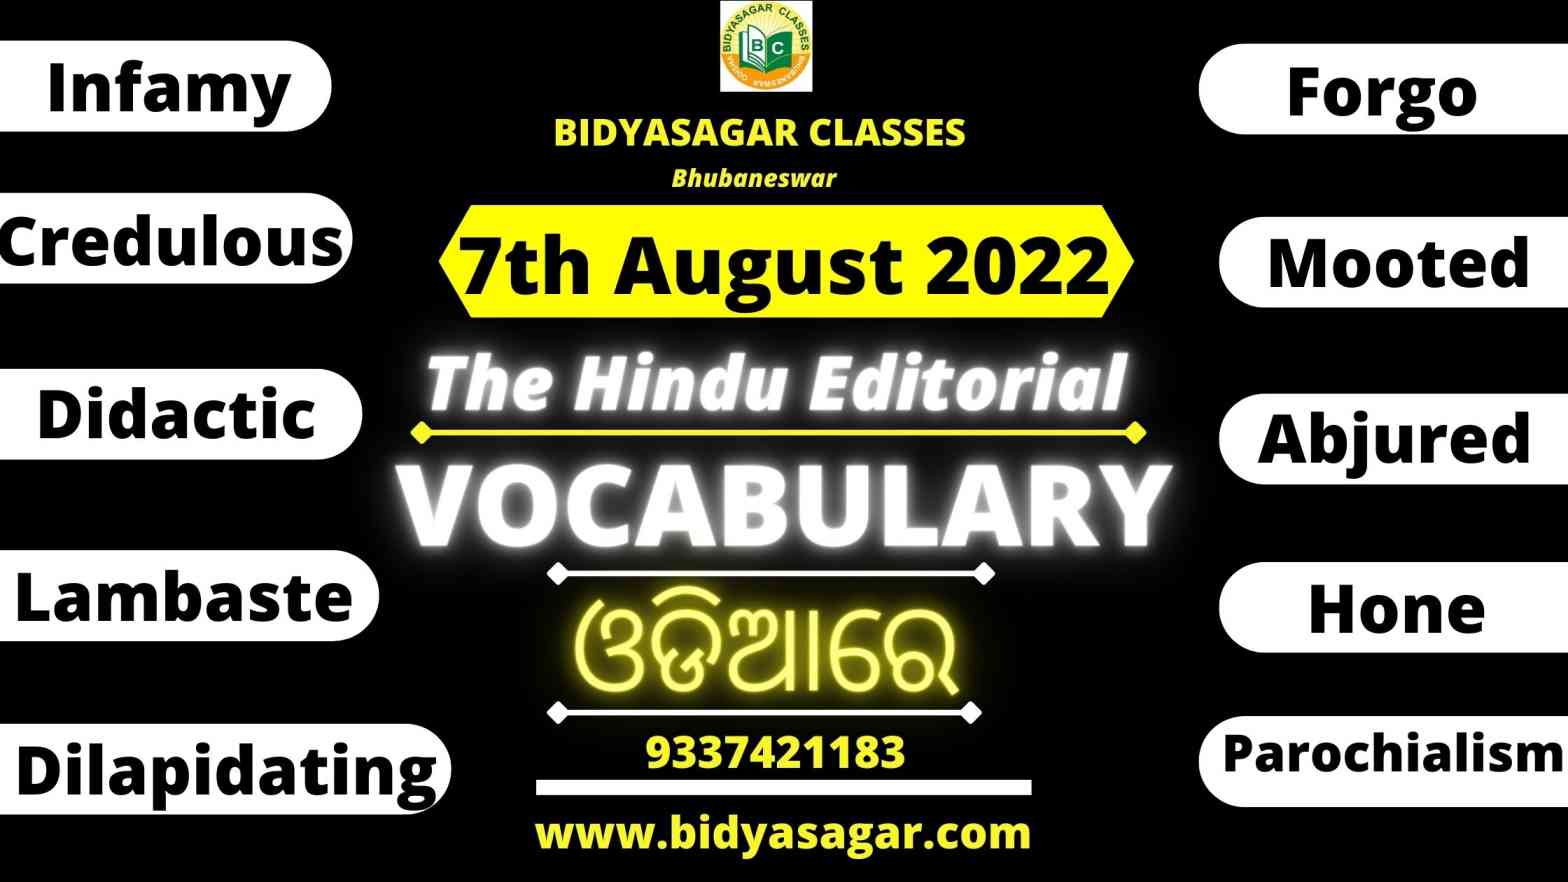 The Hindu Editorial Vocabulary of 7th August 2022